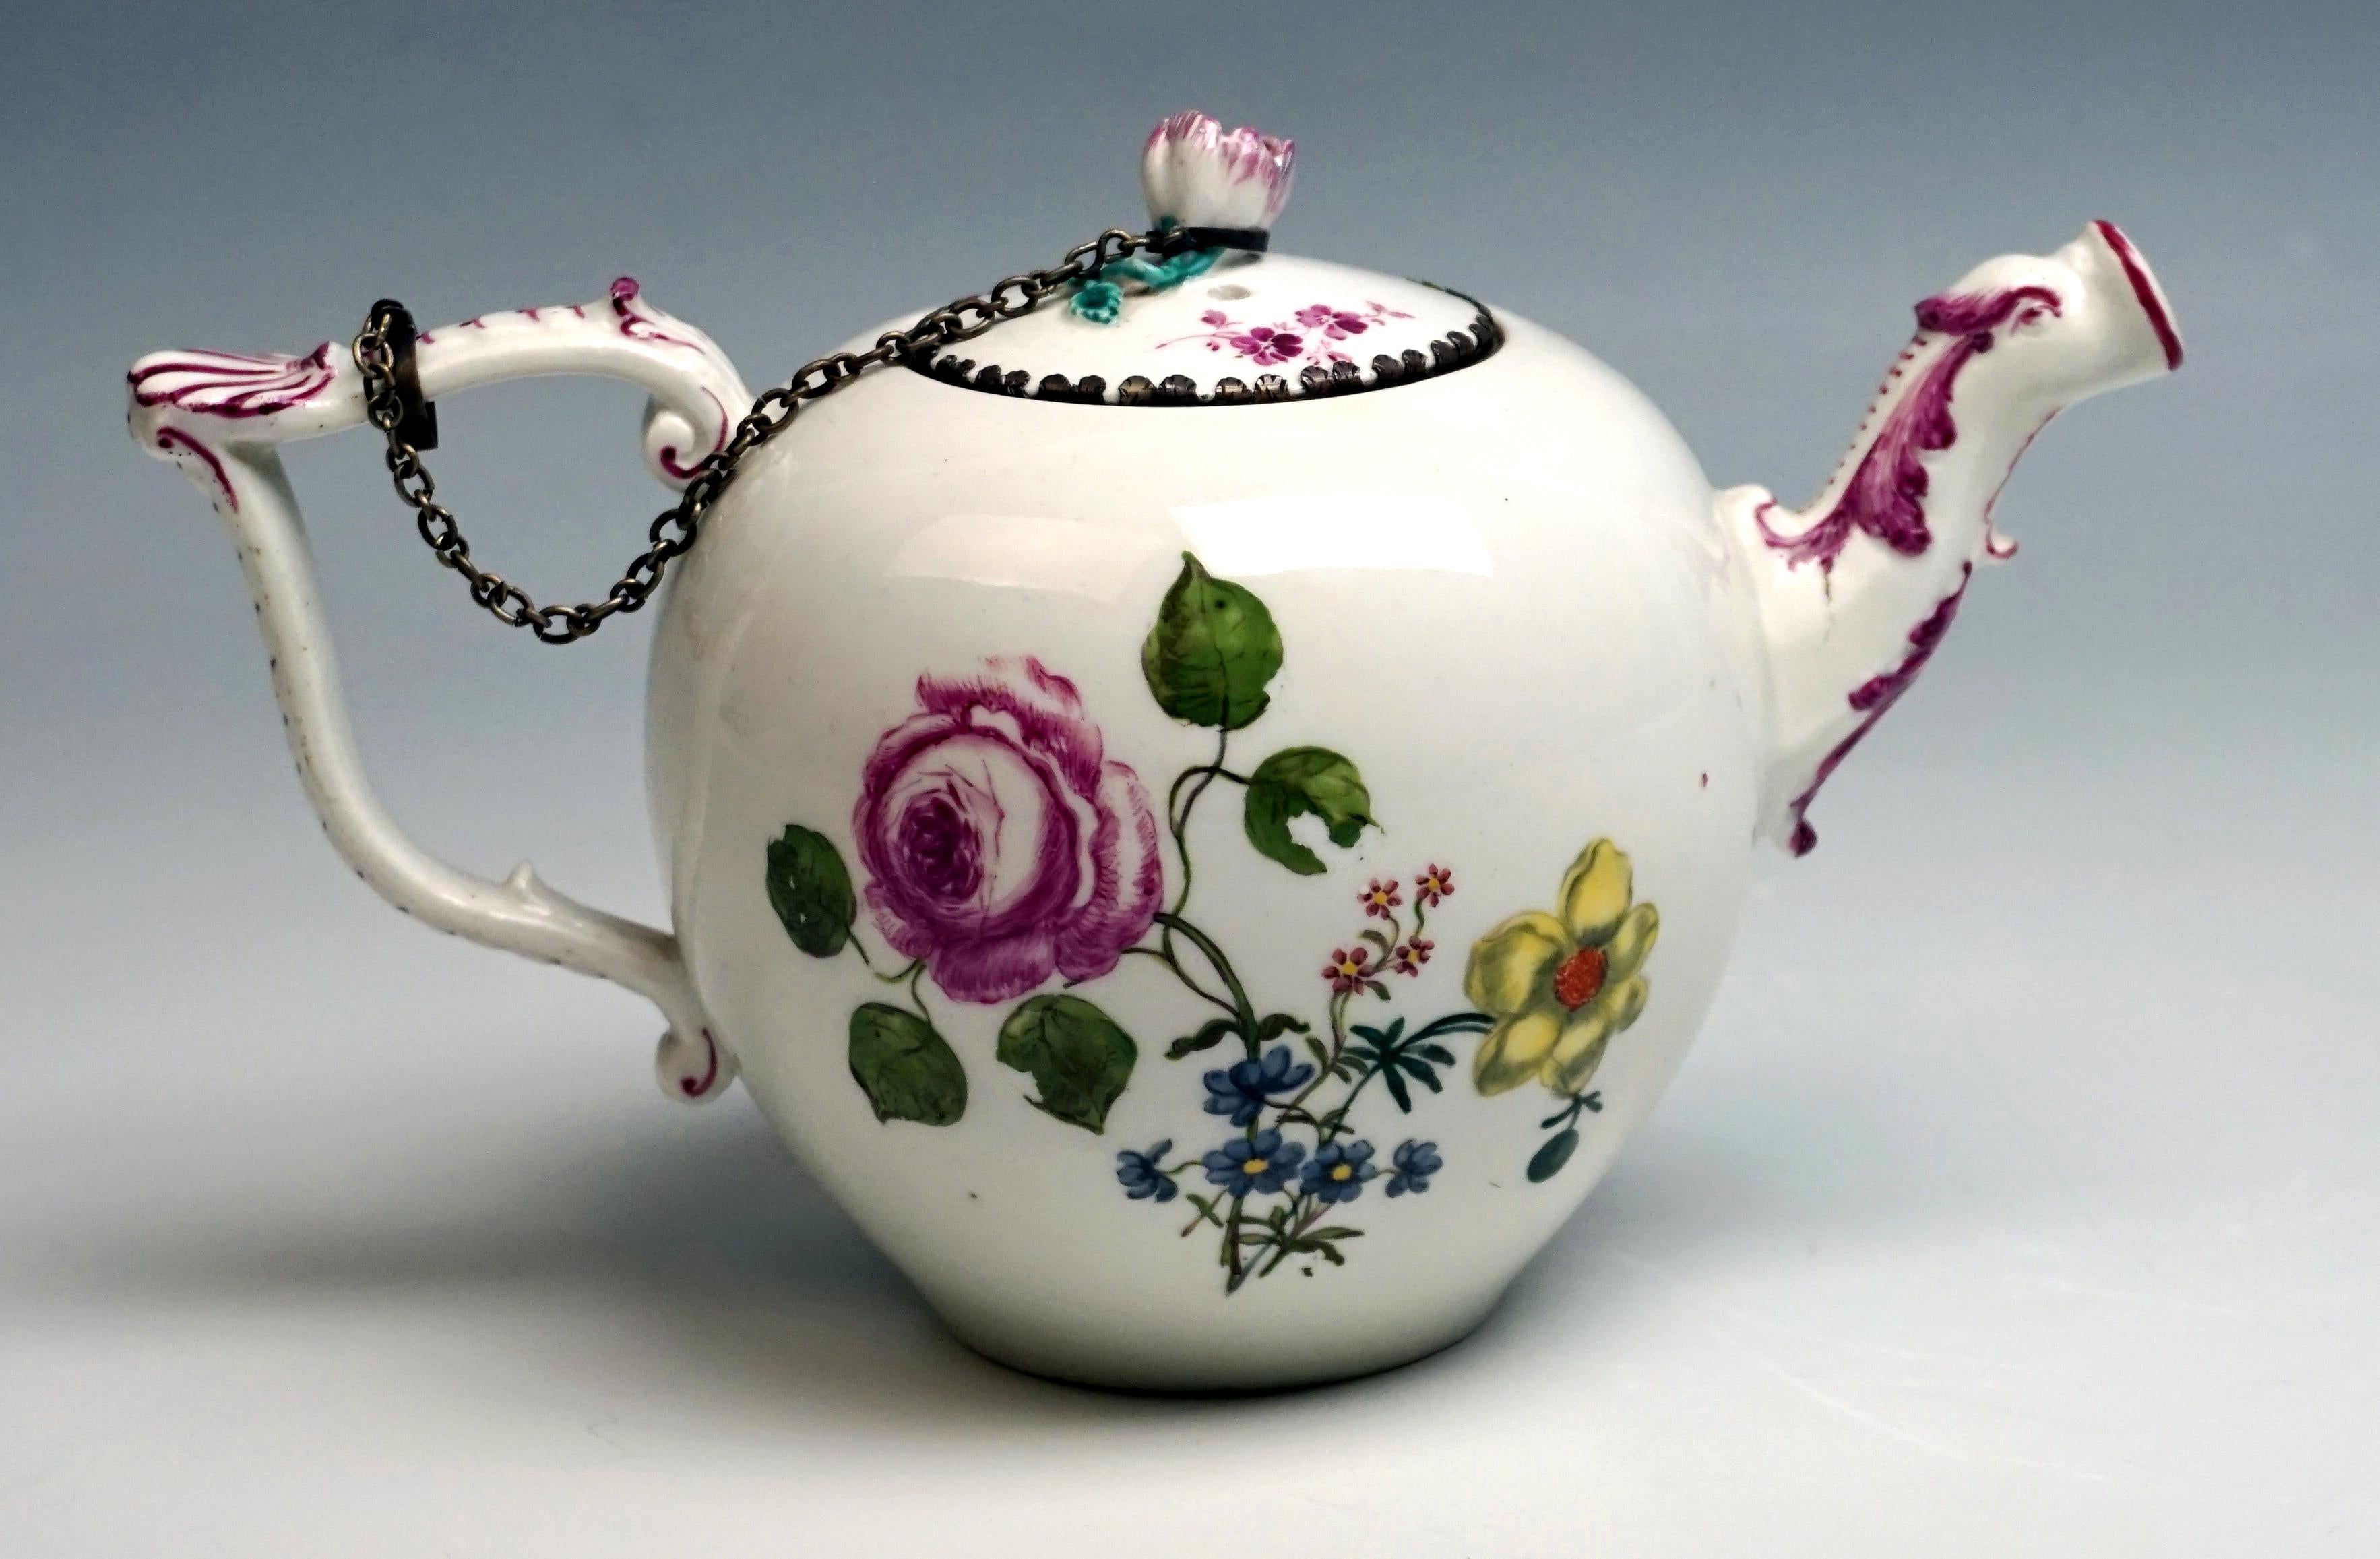 Early and rare piece From The Meissen/Germany Manufactory

Dating: made circa 1740
Material: white porcelain, glossy finish
Technique: handmade porcelain, finest painting

Specifications:
Very early Meissen tea pot circa 1740. The belly of